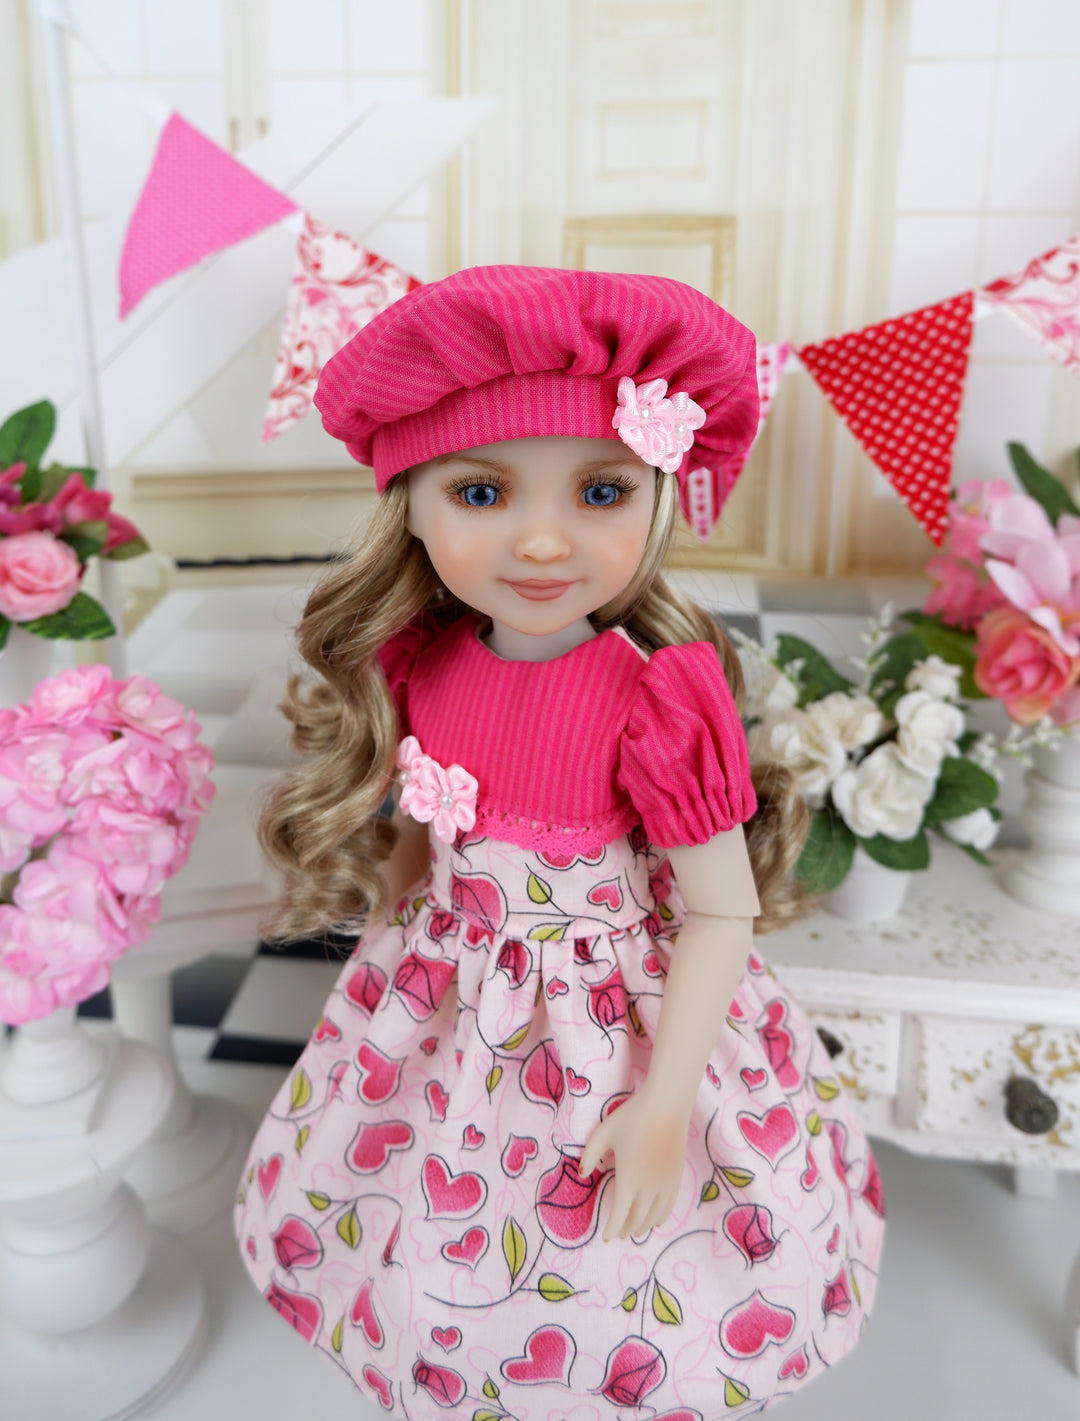 Valentine Roses - dress with shoes for Ruby Red Fashion Friends doll